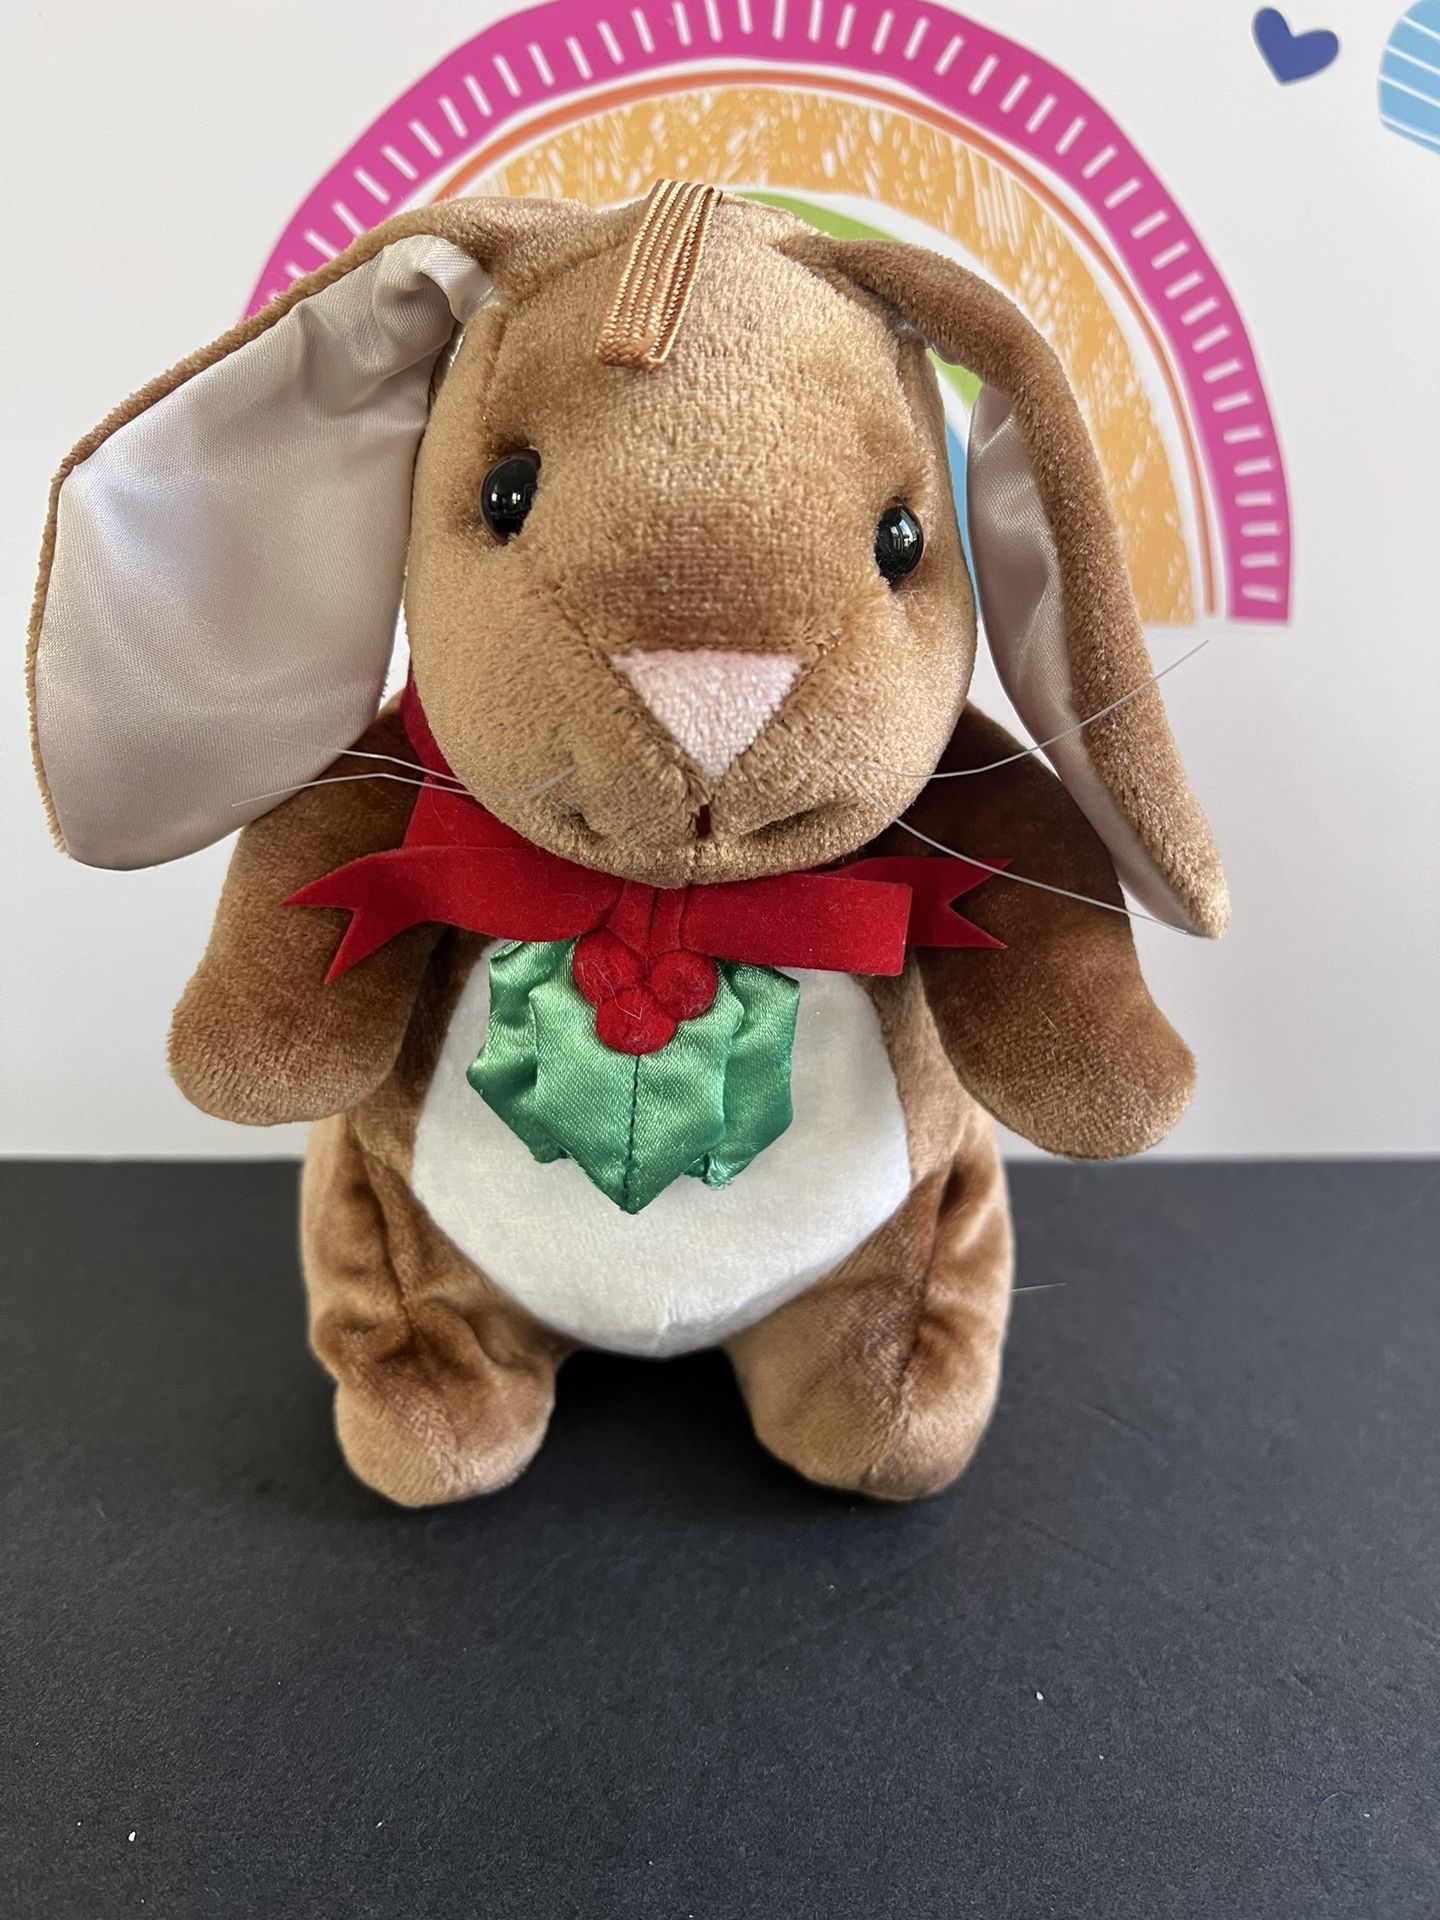 VINTAGE VELVETEEN RABBIT  FROM 1985 -  PLUSH  - EXCELLENT CONDITION -  8 Inch